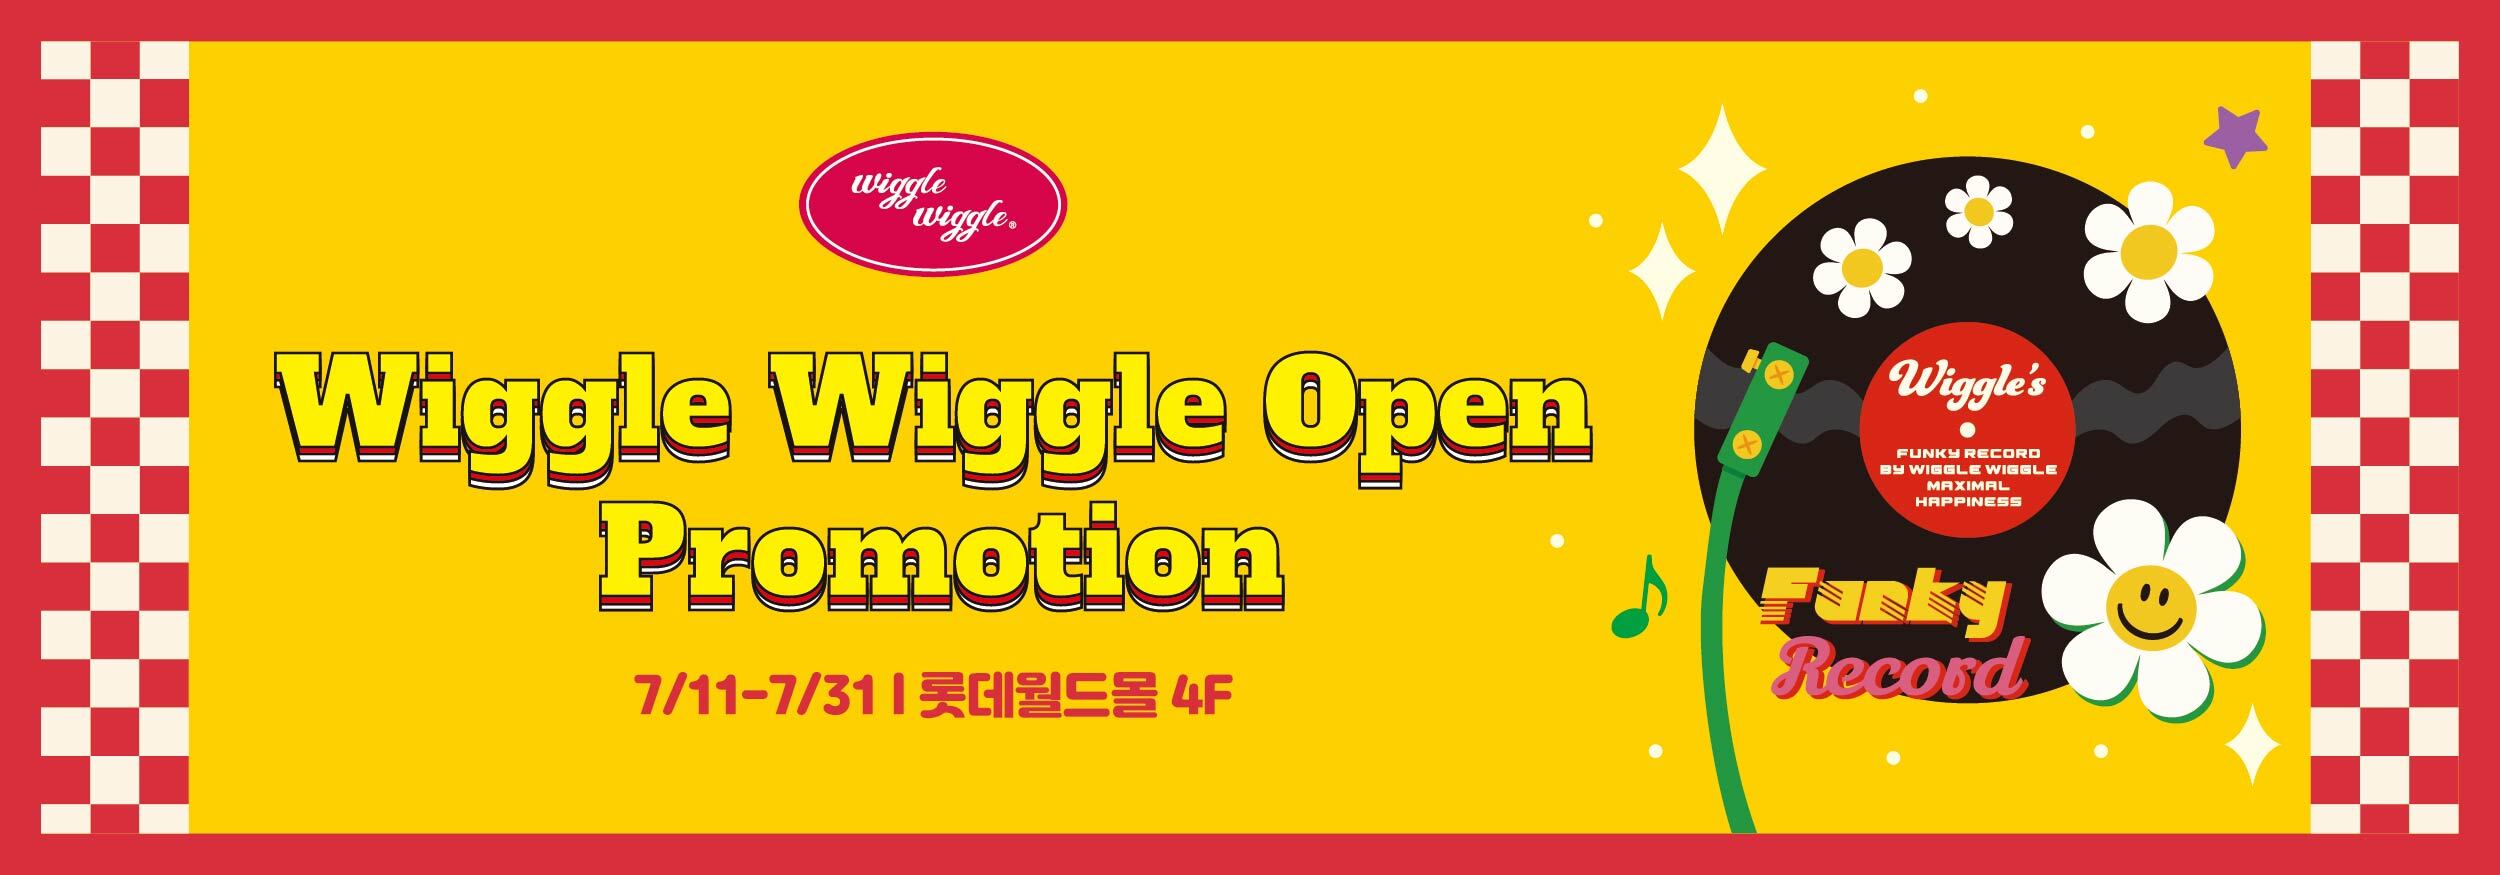 Wiggle Wiggle open promotion